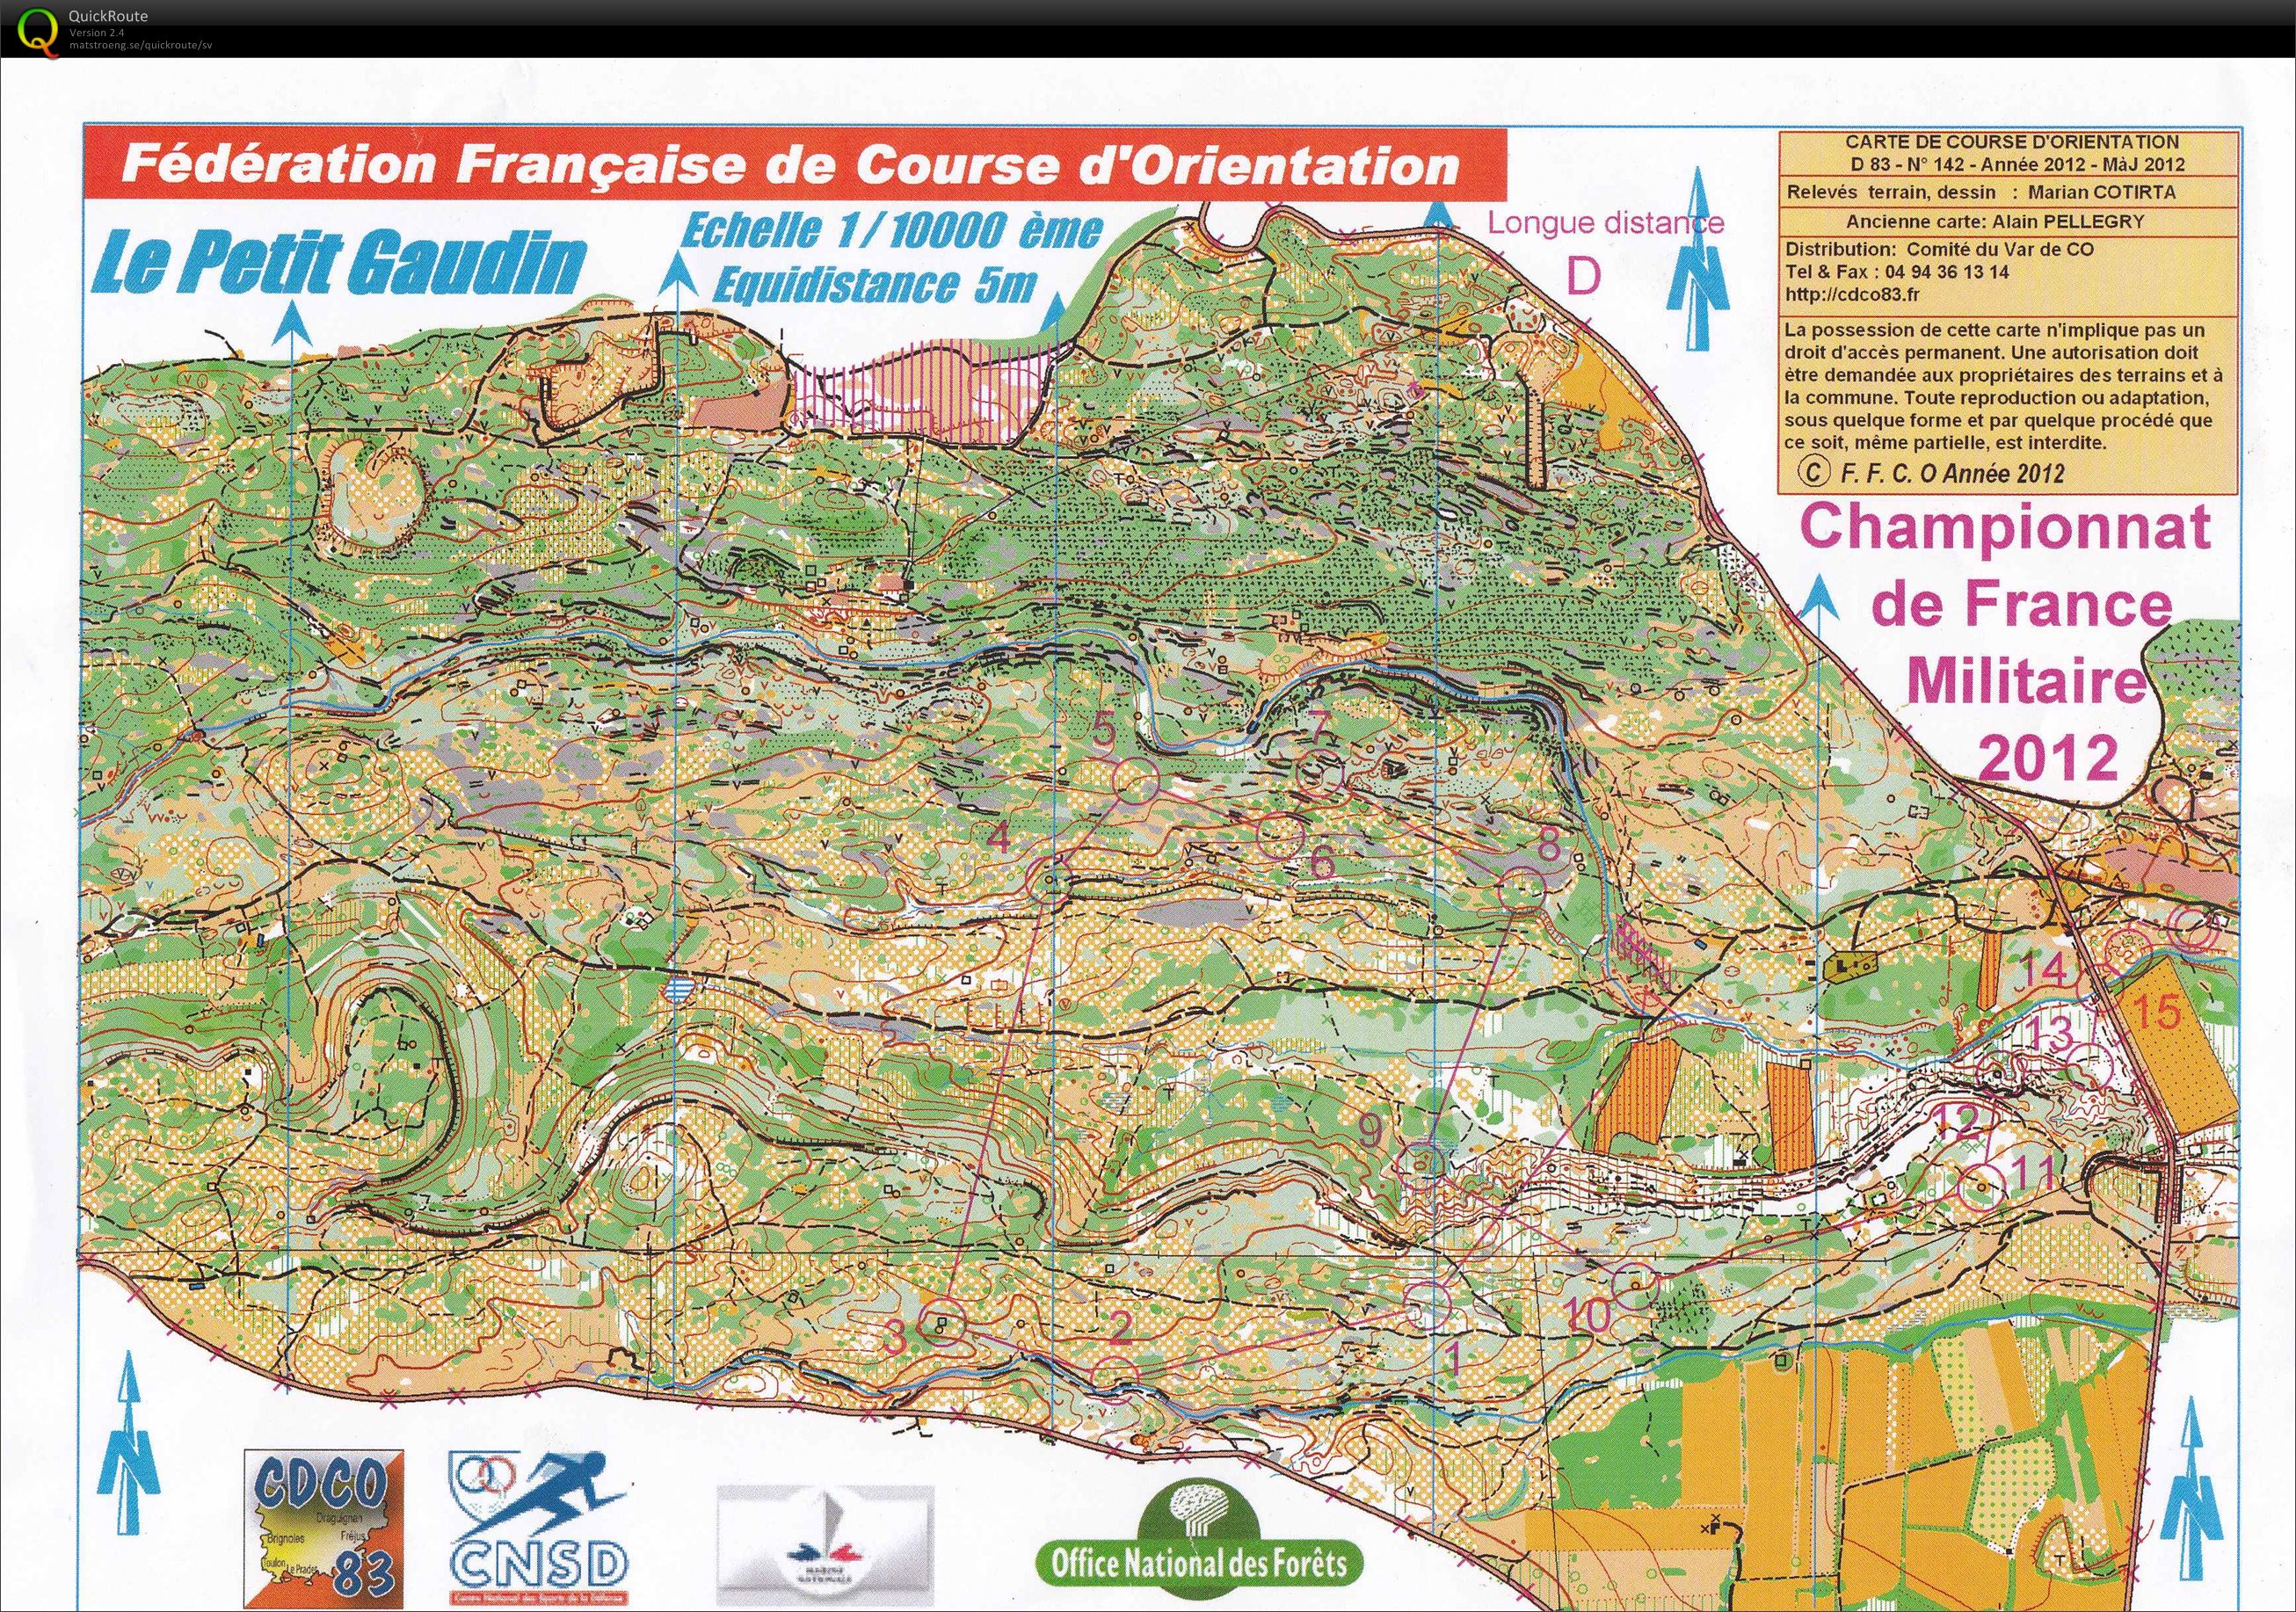 Open race after French Military long dist champ H60 (2012-05-11)